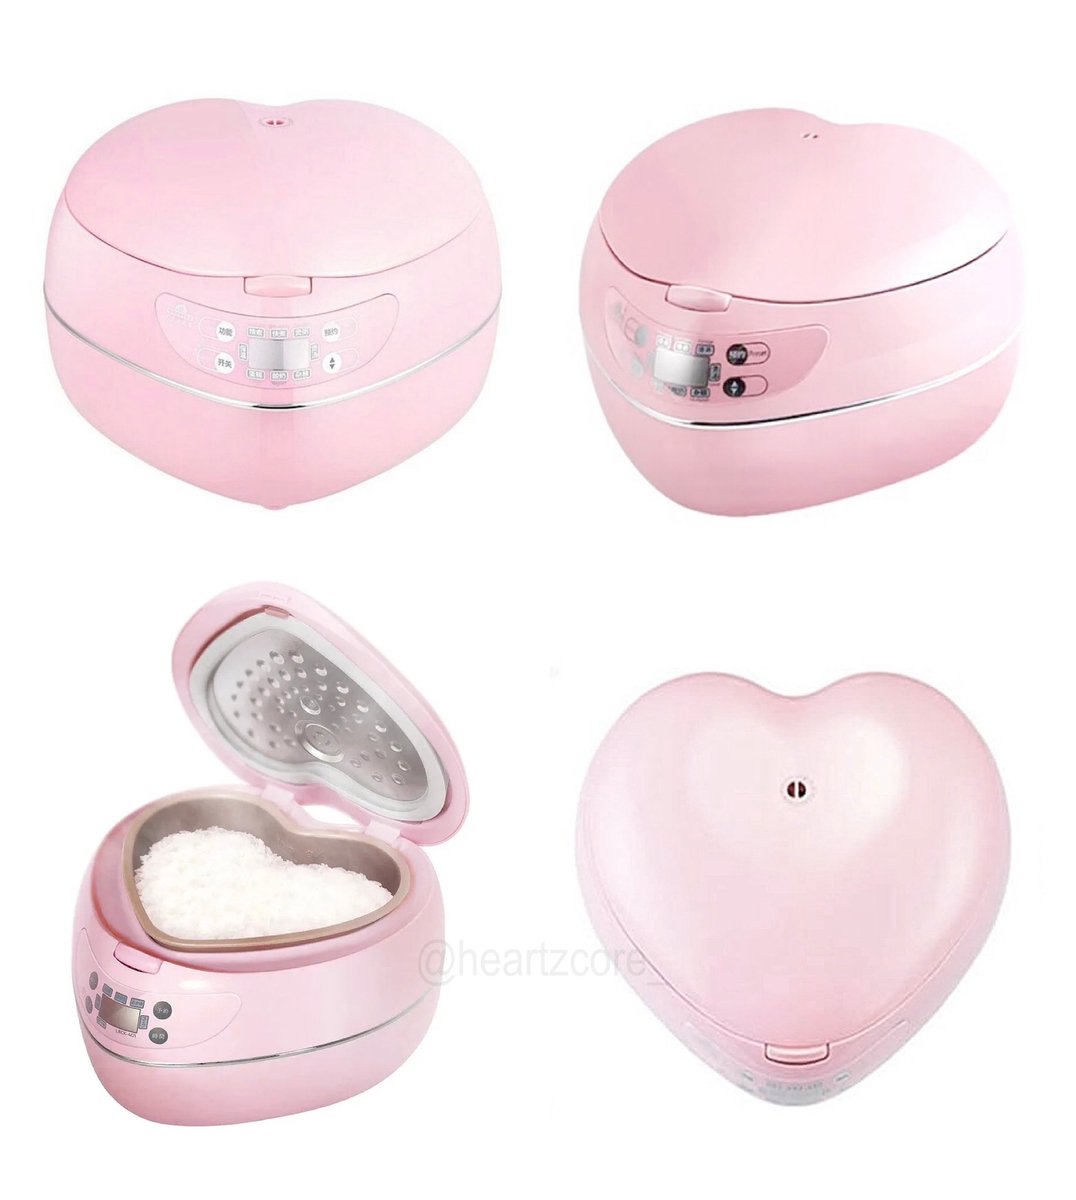 pink heart-shaped rice cooker